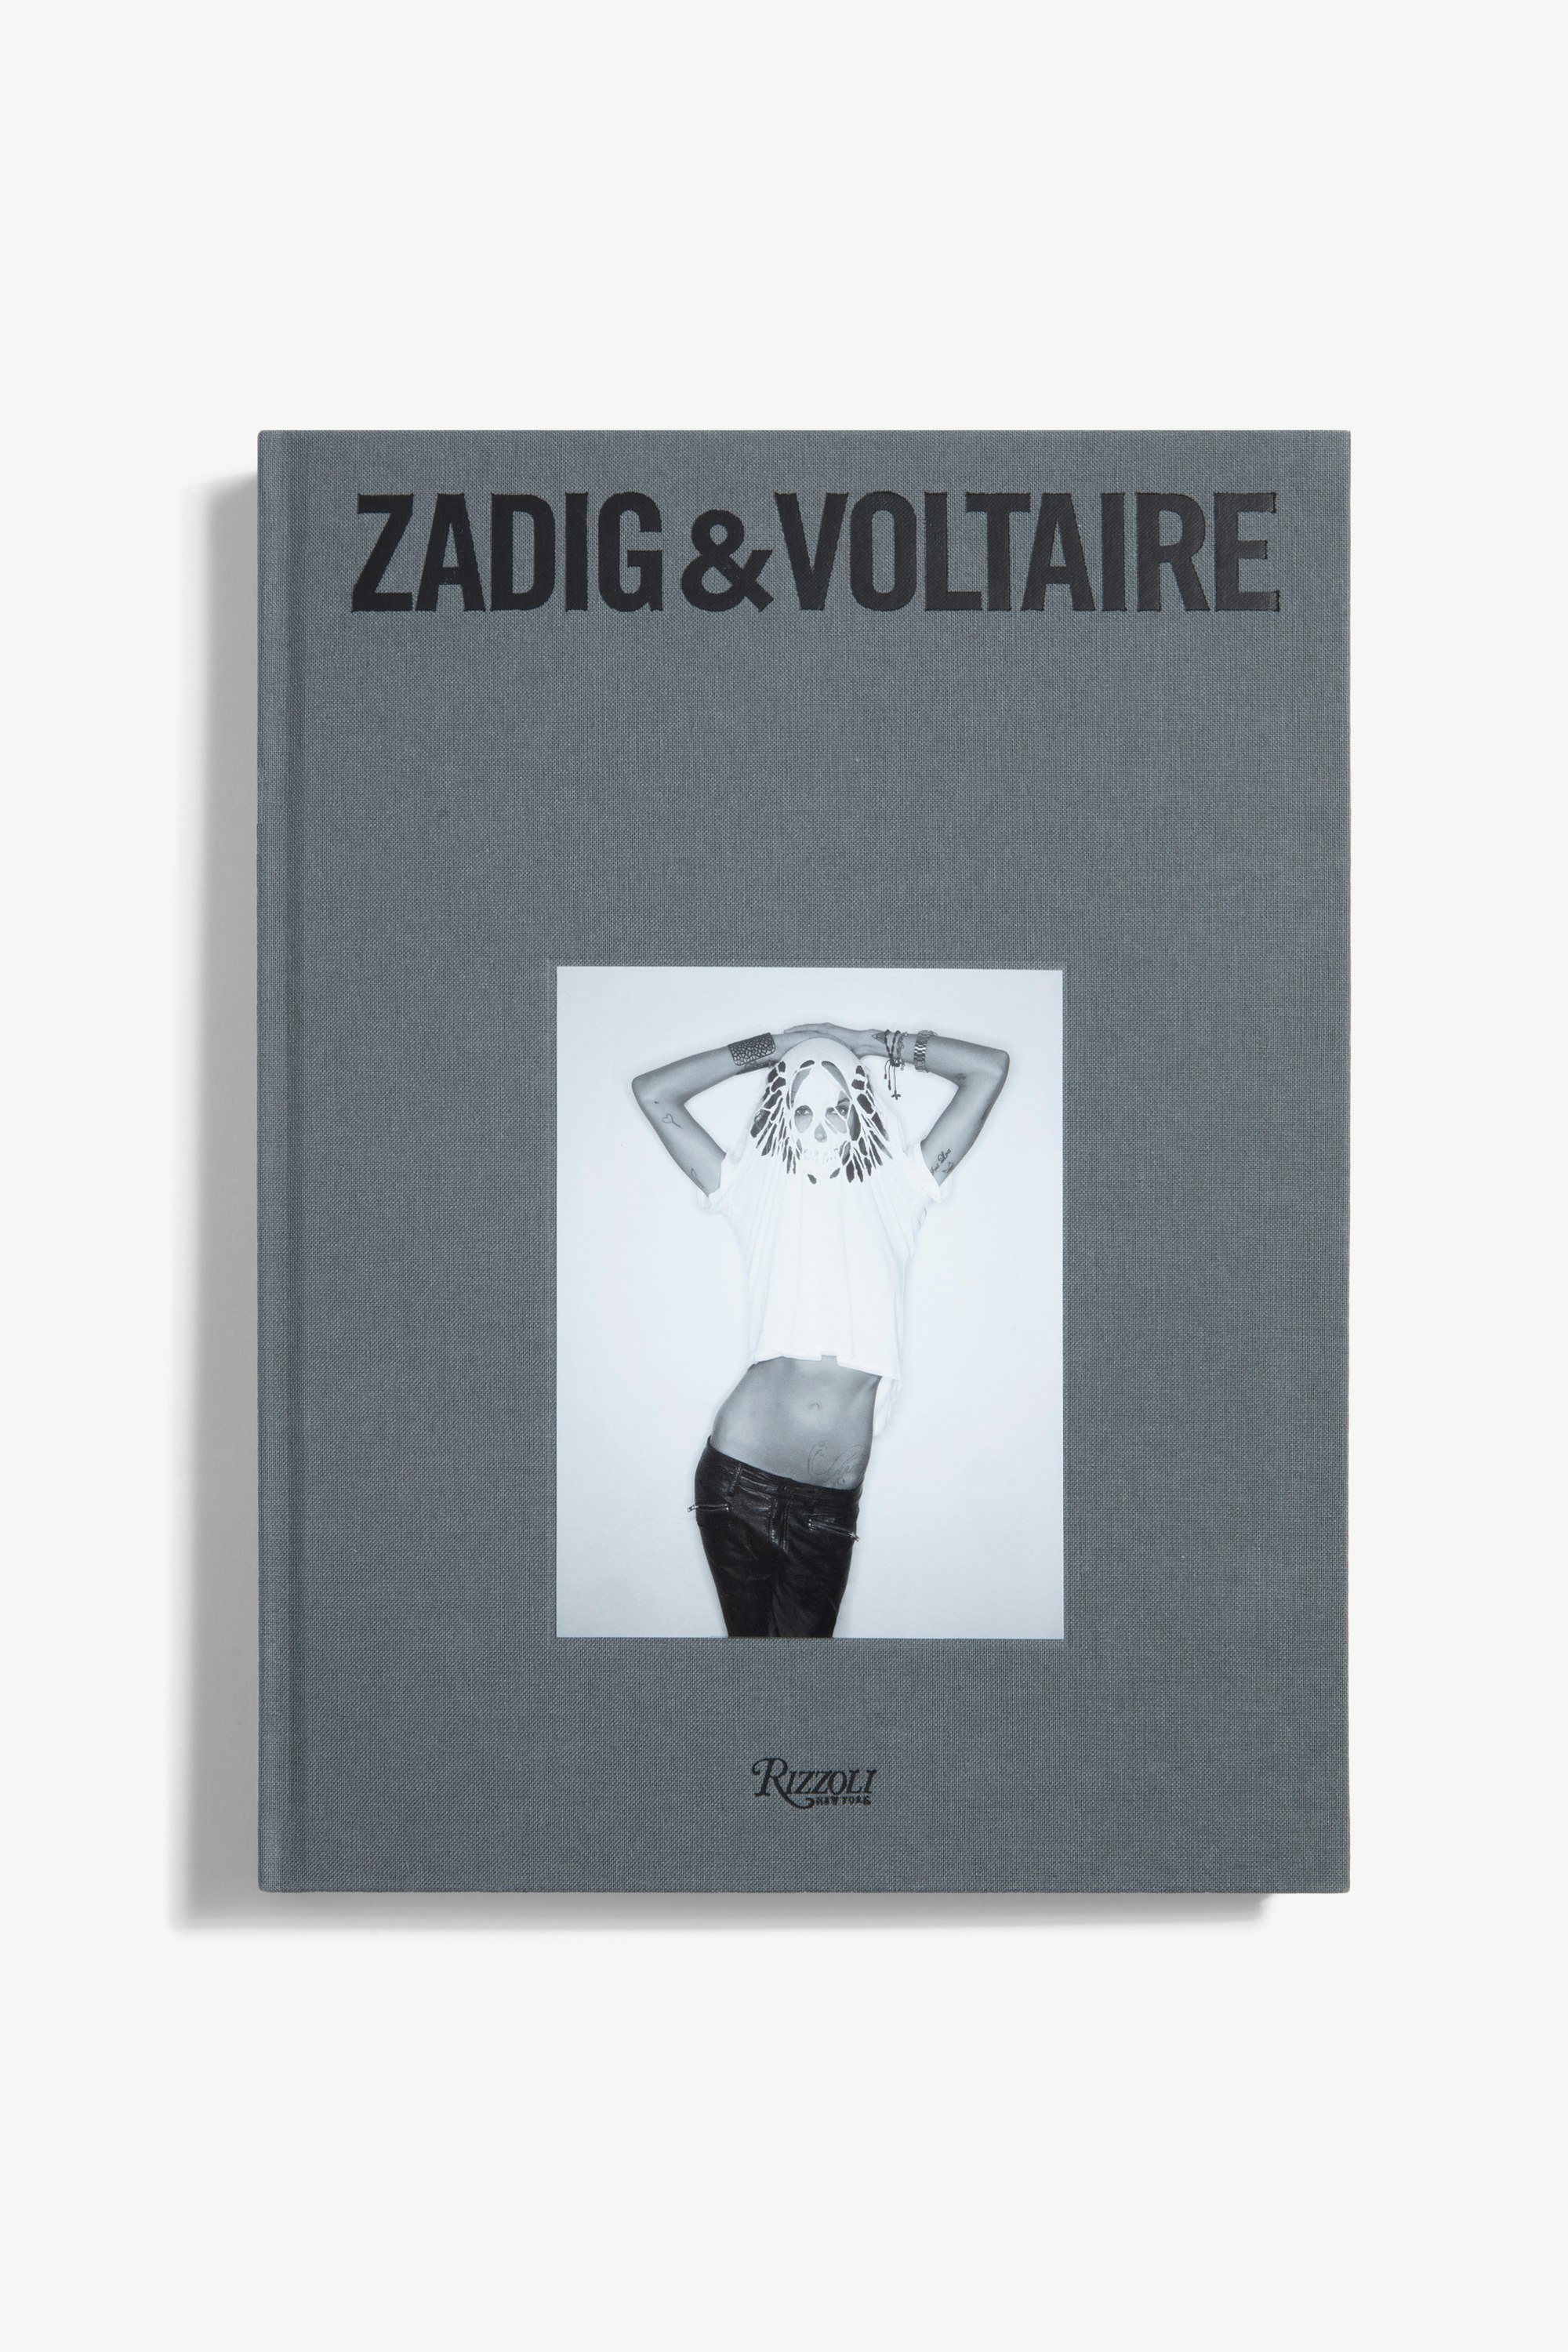 Book "Zadig&Voltaire: Established 1997 in Paris" - French Version - The first monograph on Zadig&Voltaire, published on the occasion of the brand’s 25th anniversary - French version.